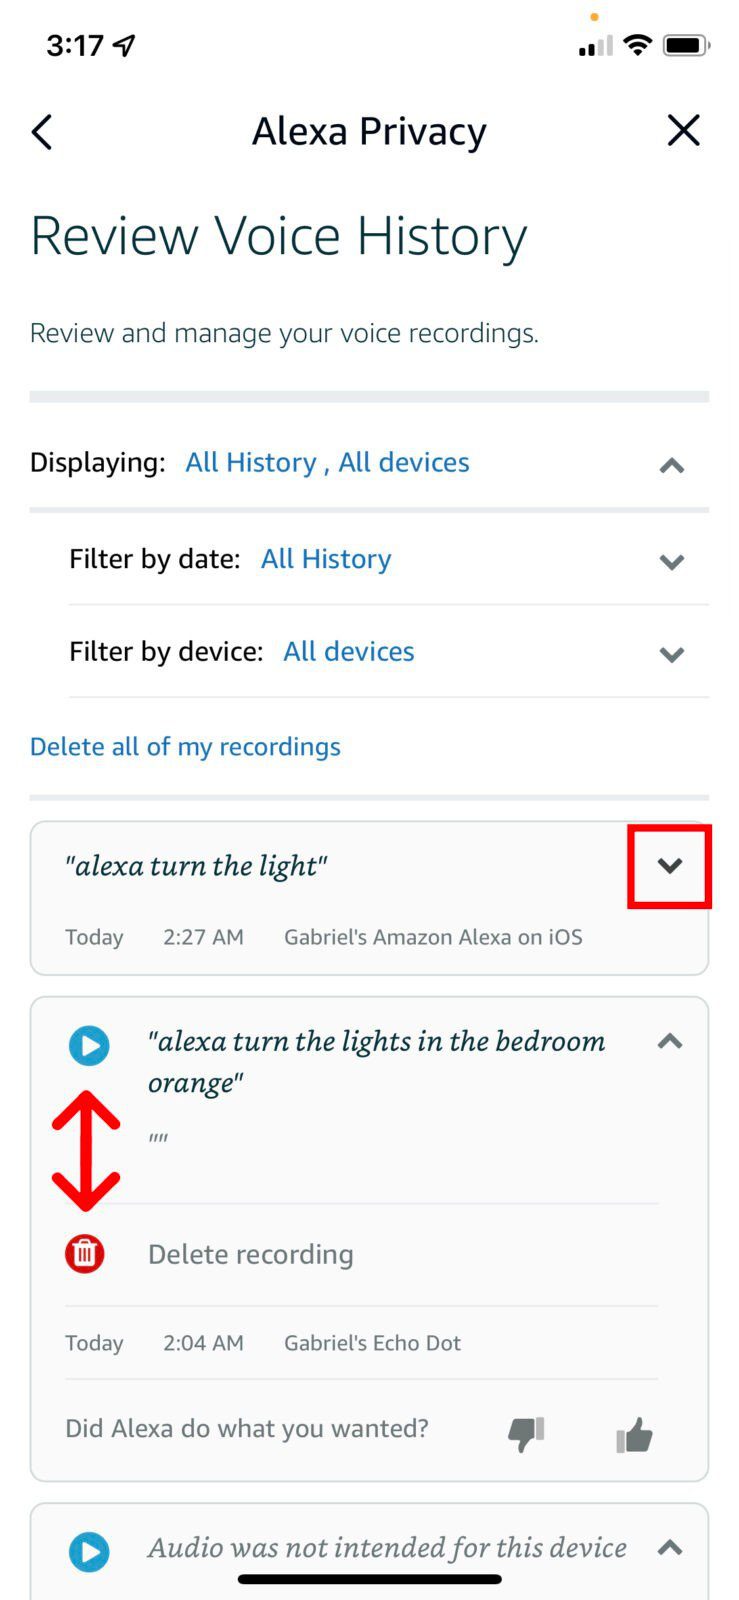 How to Delete Your Alexa Recording History in the App